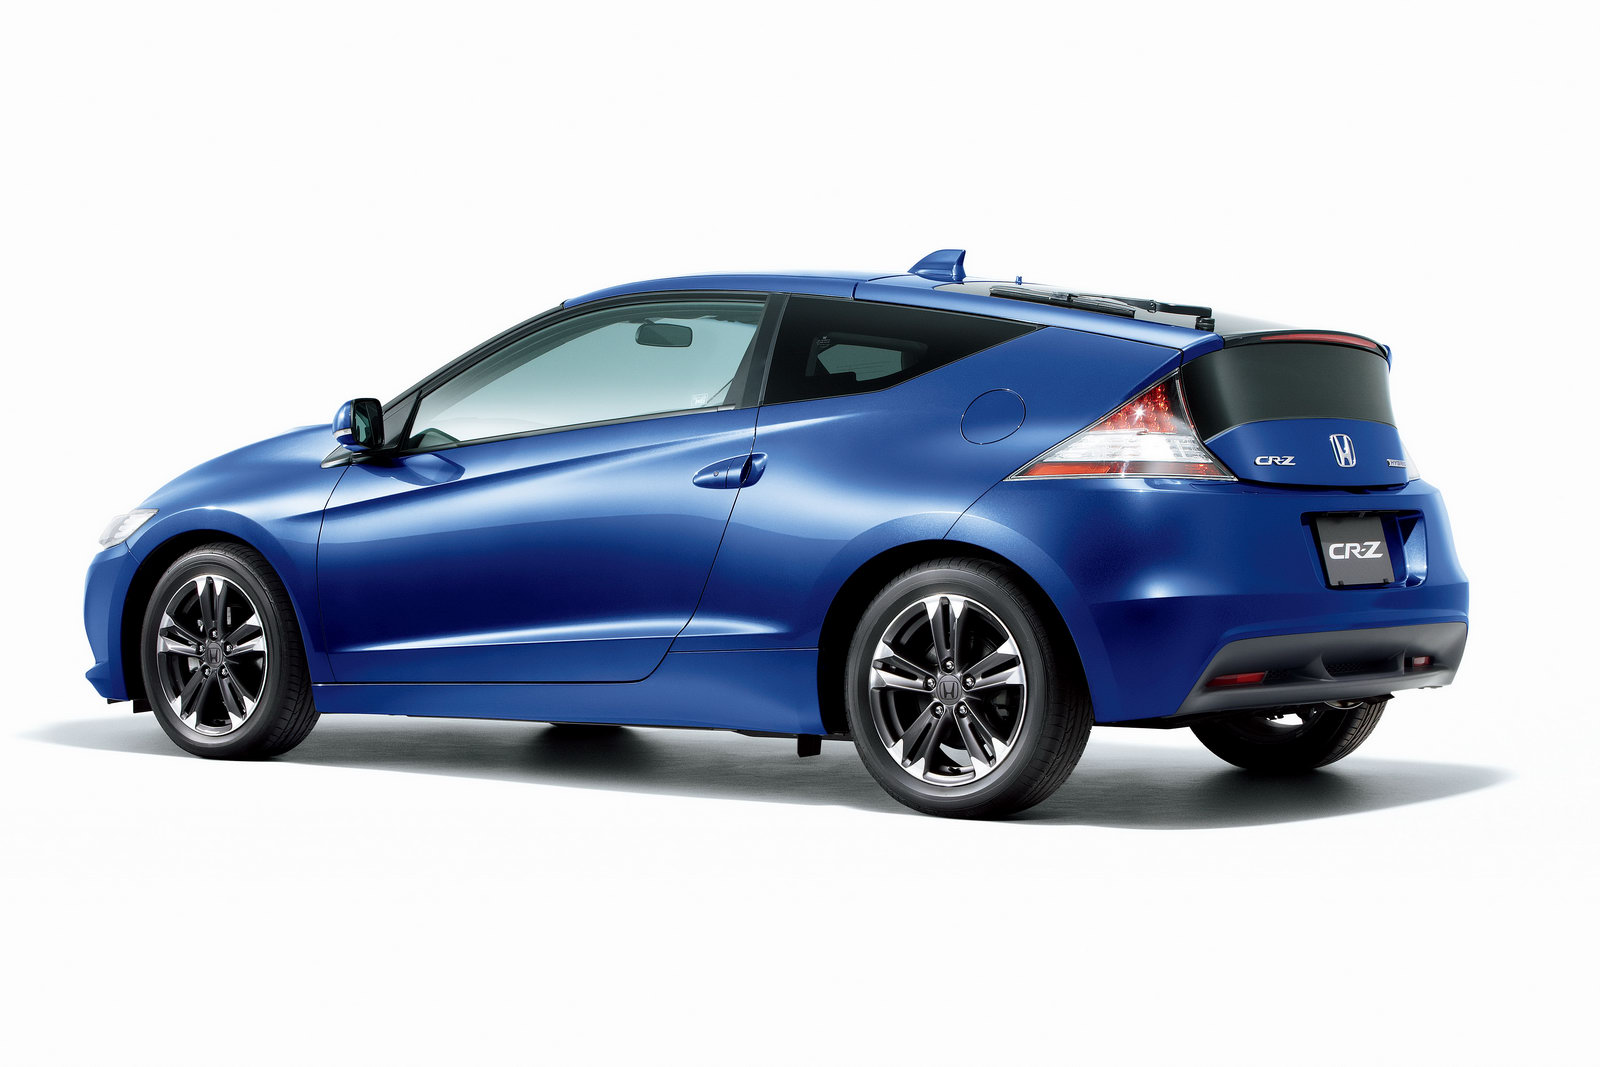 New Honda CR-Z JCOTY Memorial Award Edition Shows off with Special Paint…an...